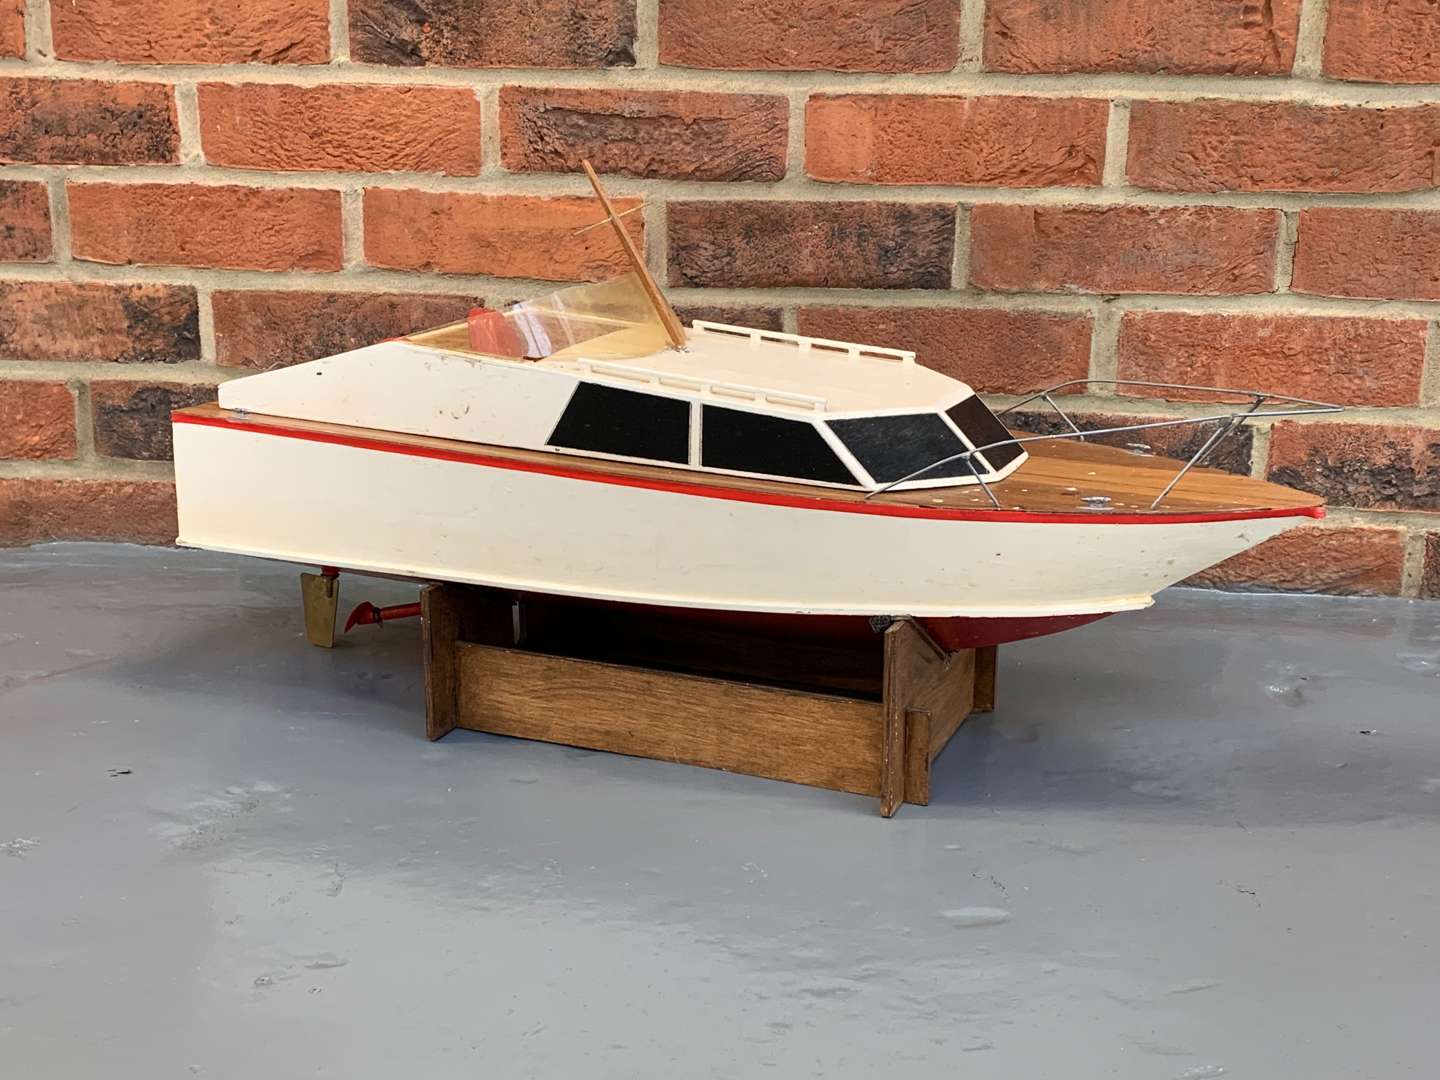 <p>Wooden Scratch Built Model of a Remote Controlled Speed Boat</p>